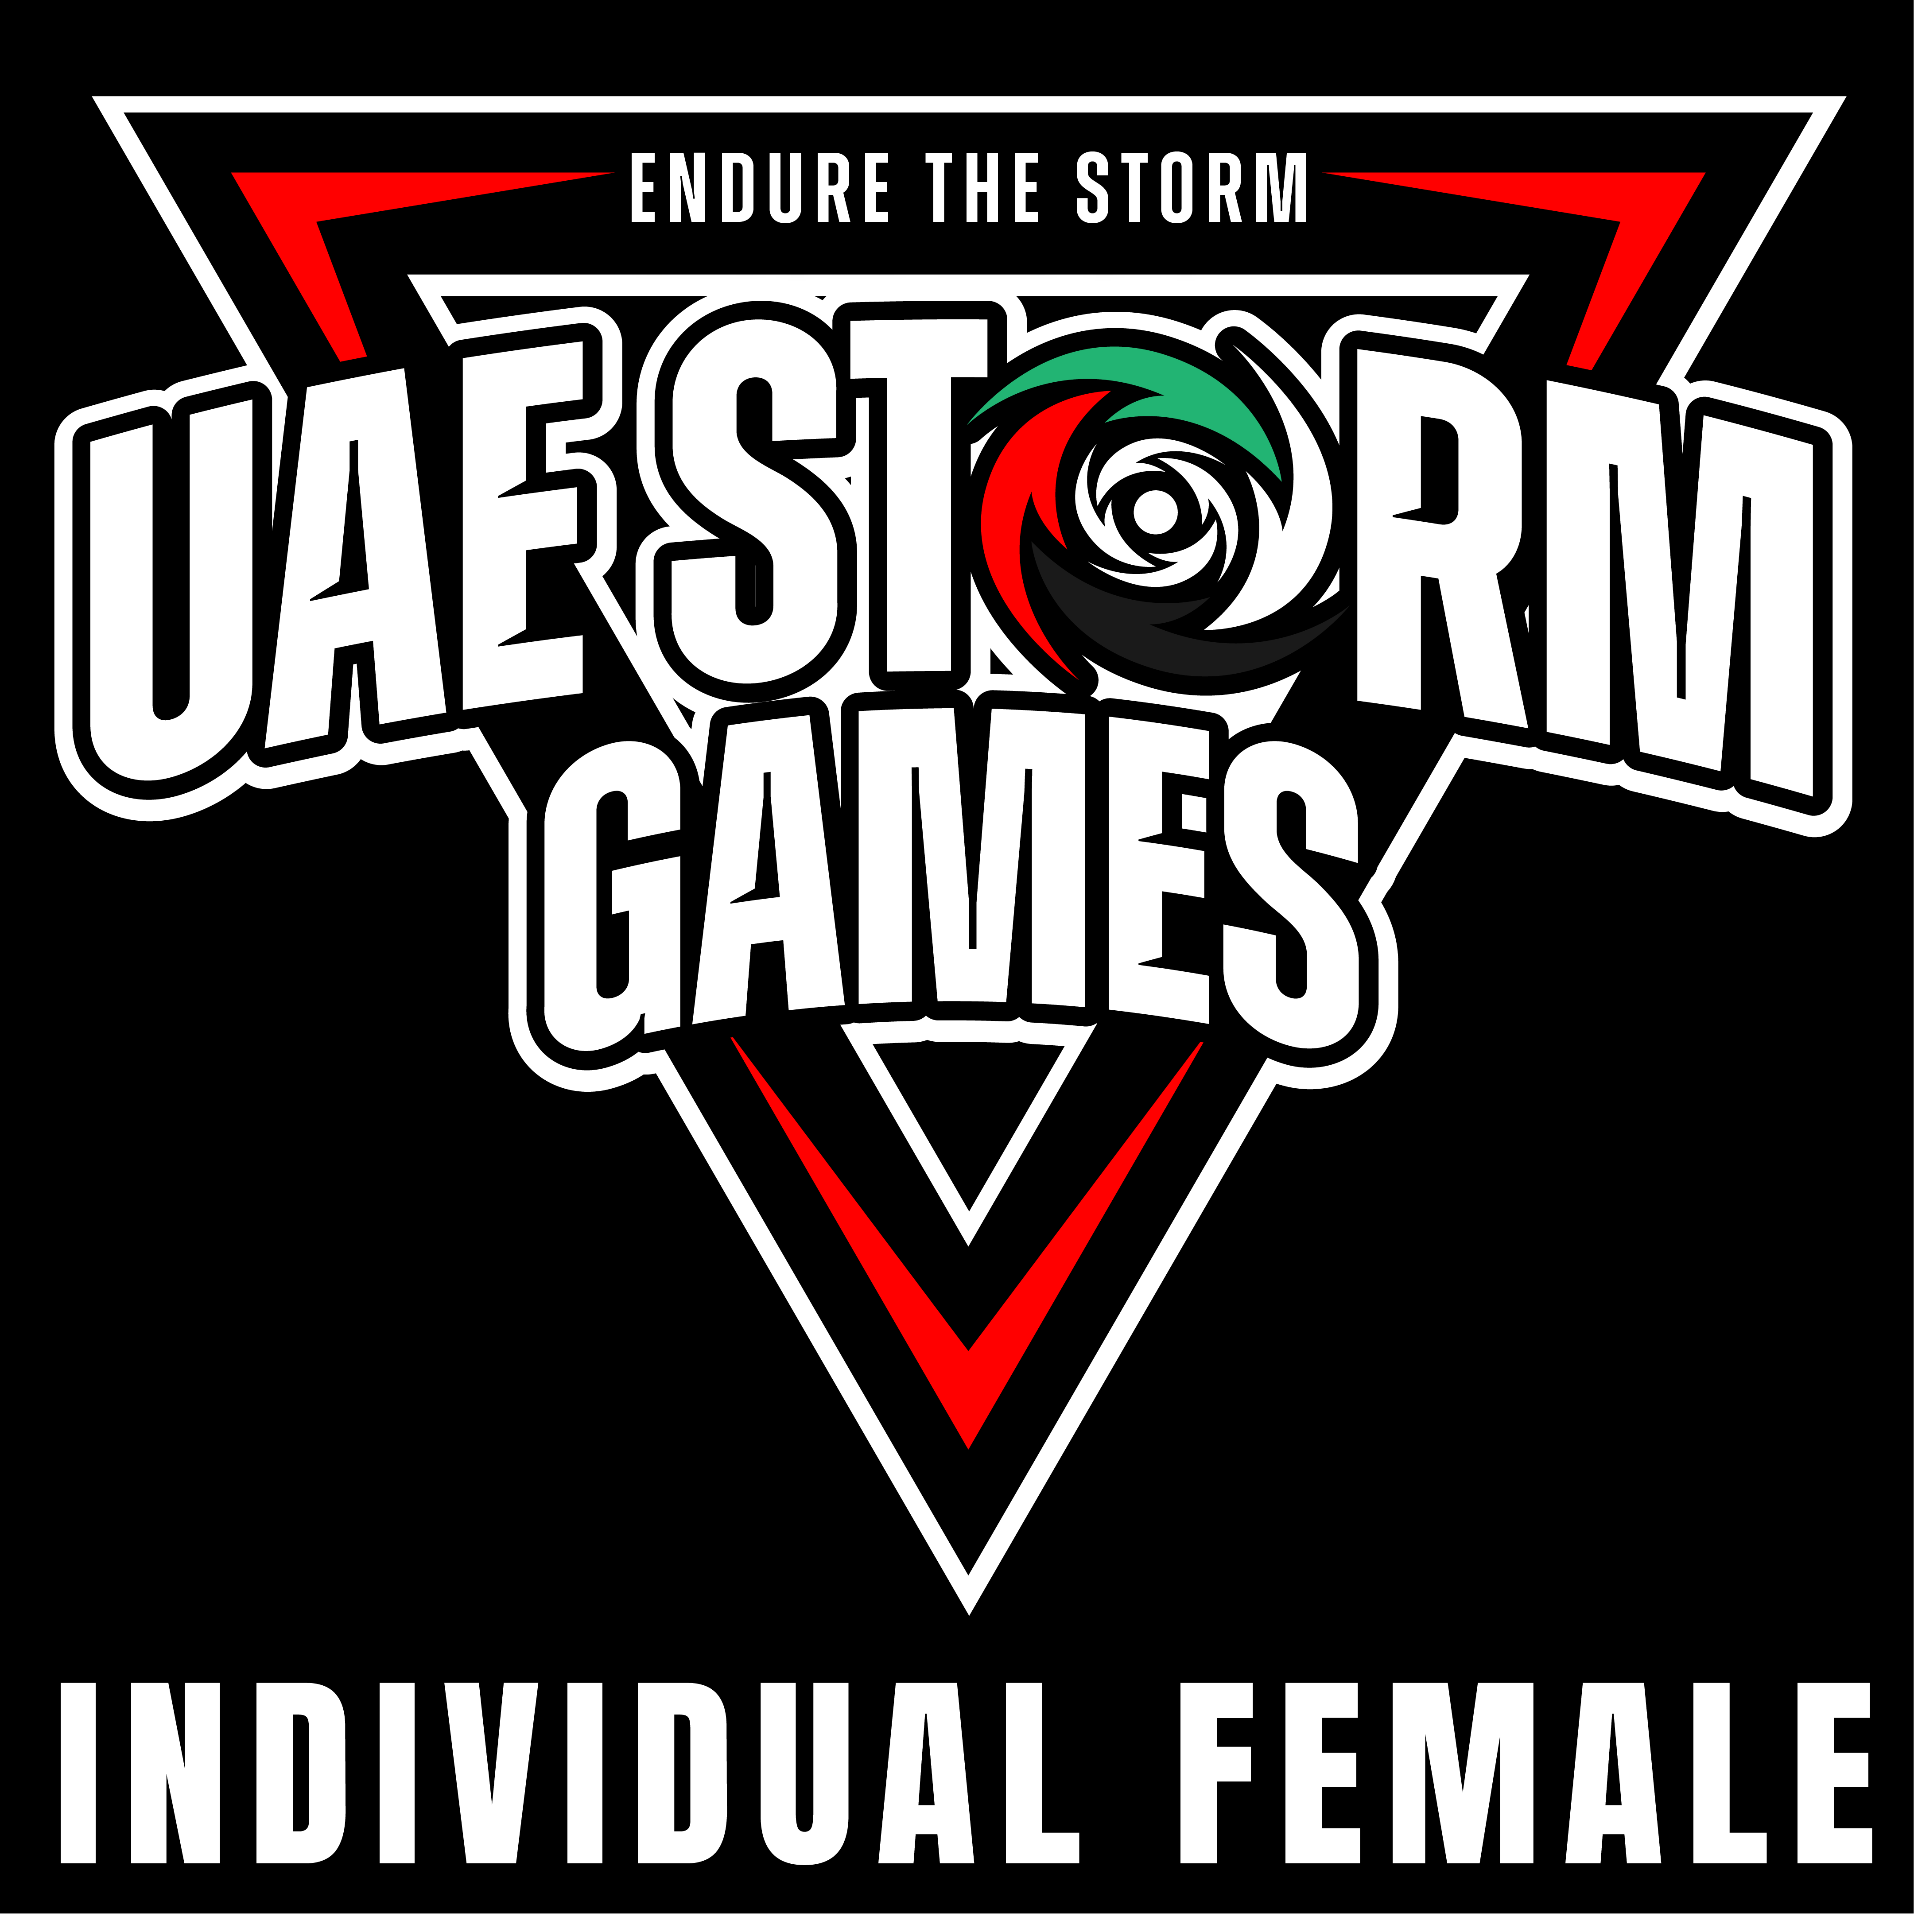 Female Individual Category from UAE Storm Games'24 for Genejack WOD